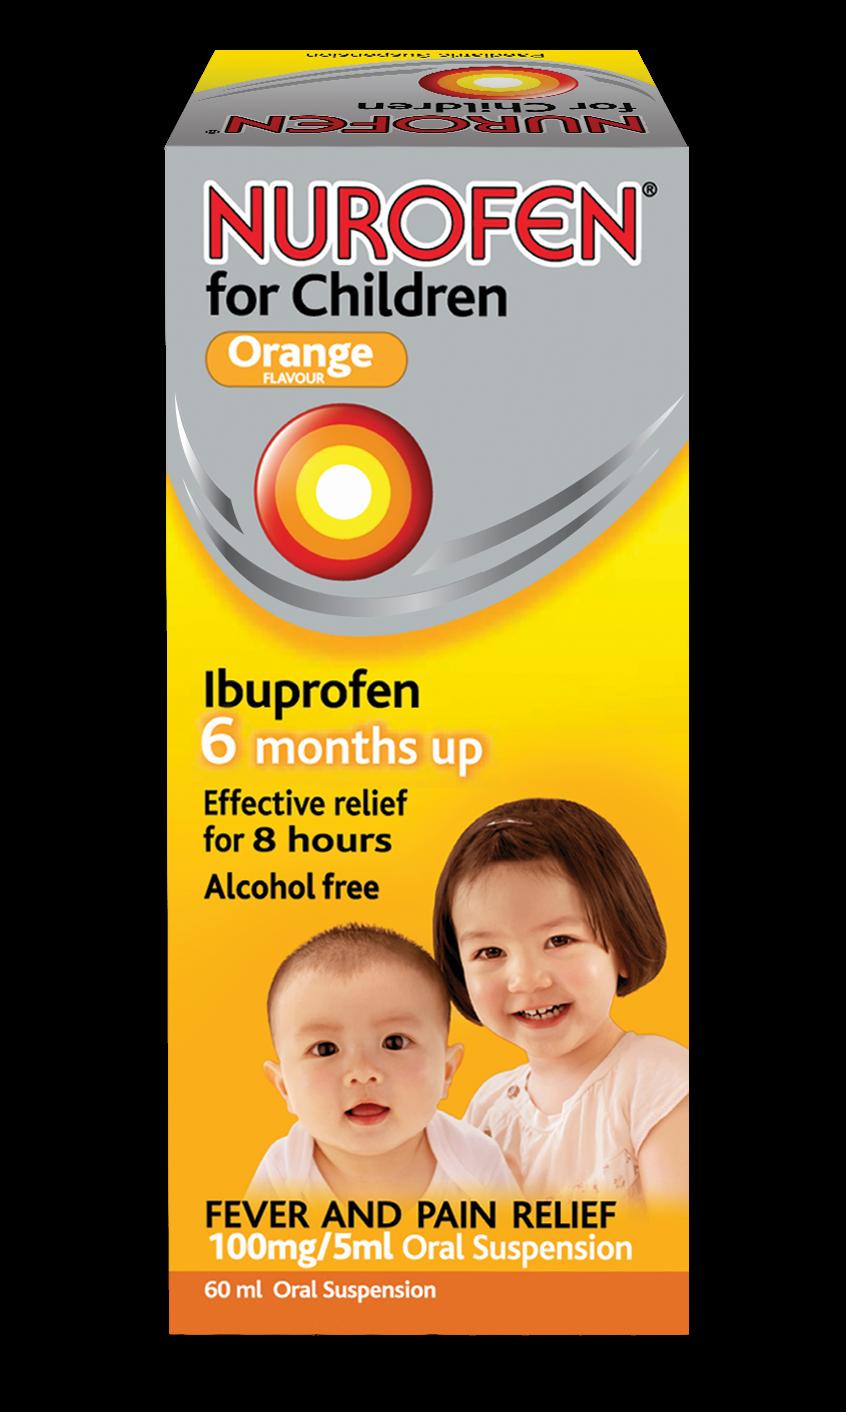 A box of Nurofen for Children, a medication for reducing fever and pain in children 6 months and older.